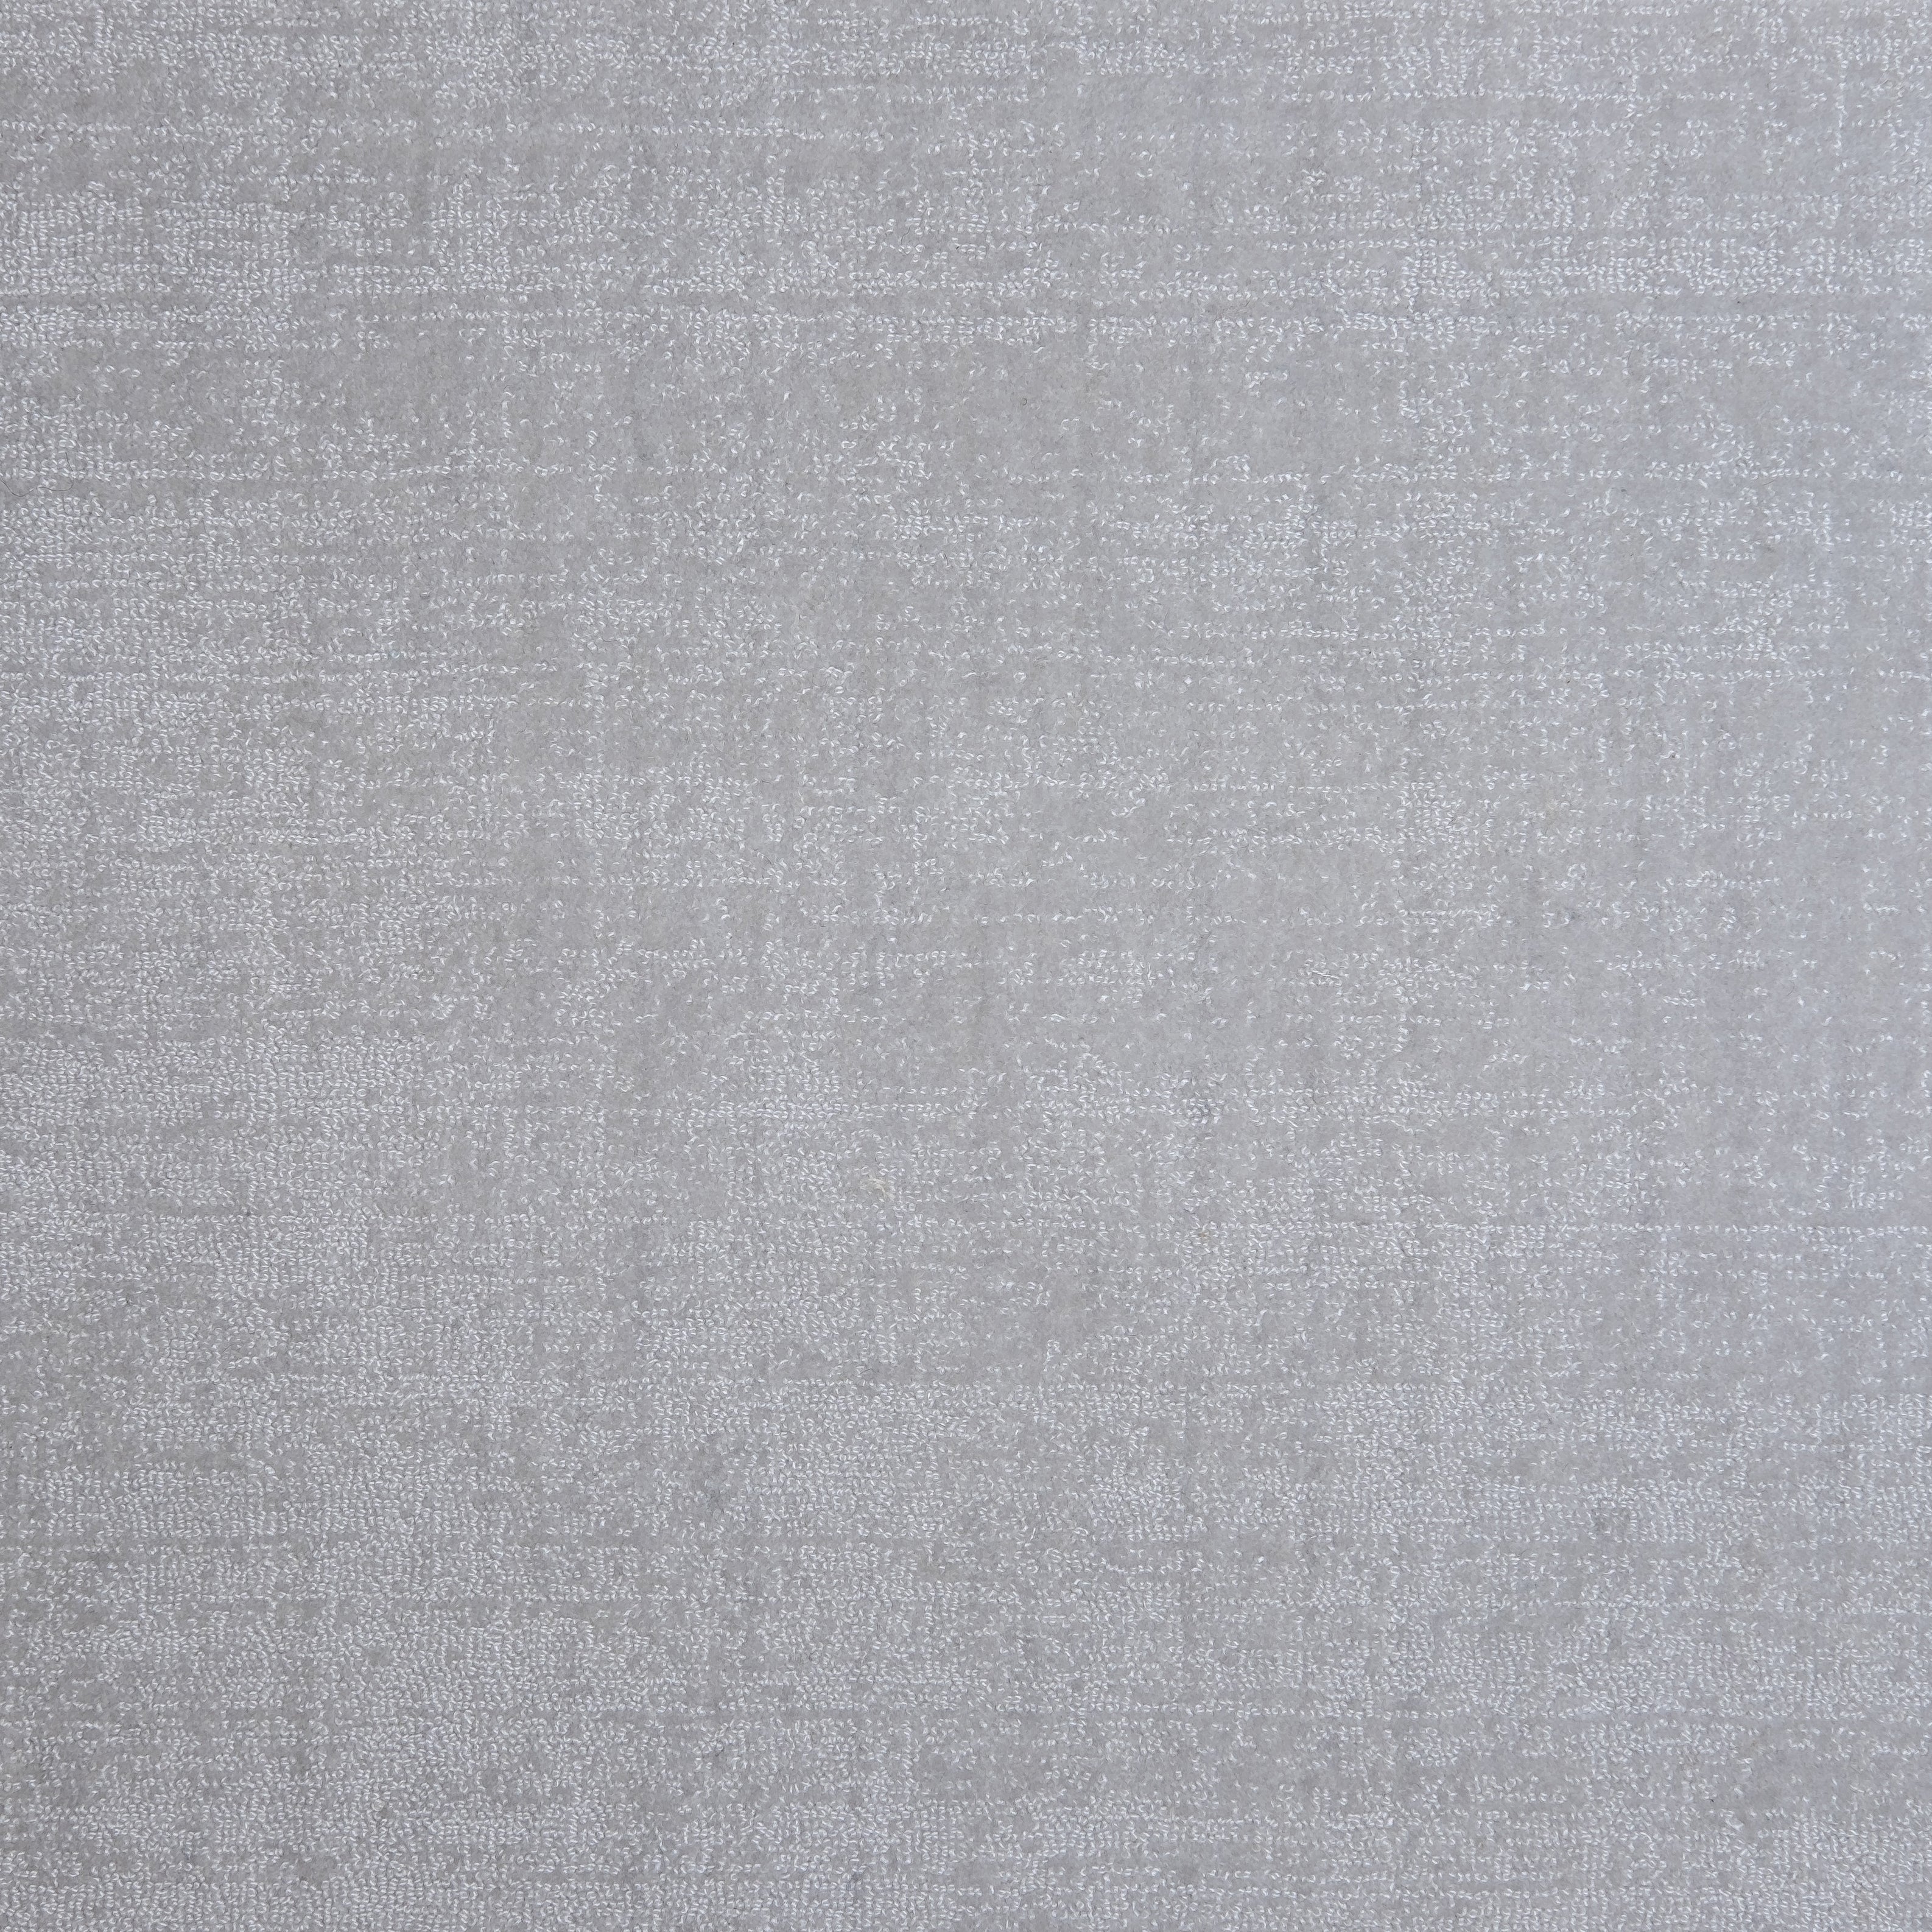 Nylon broadloom carpet swatch in a textured weave in iridescent gray.